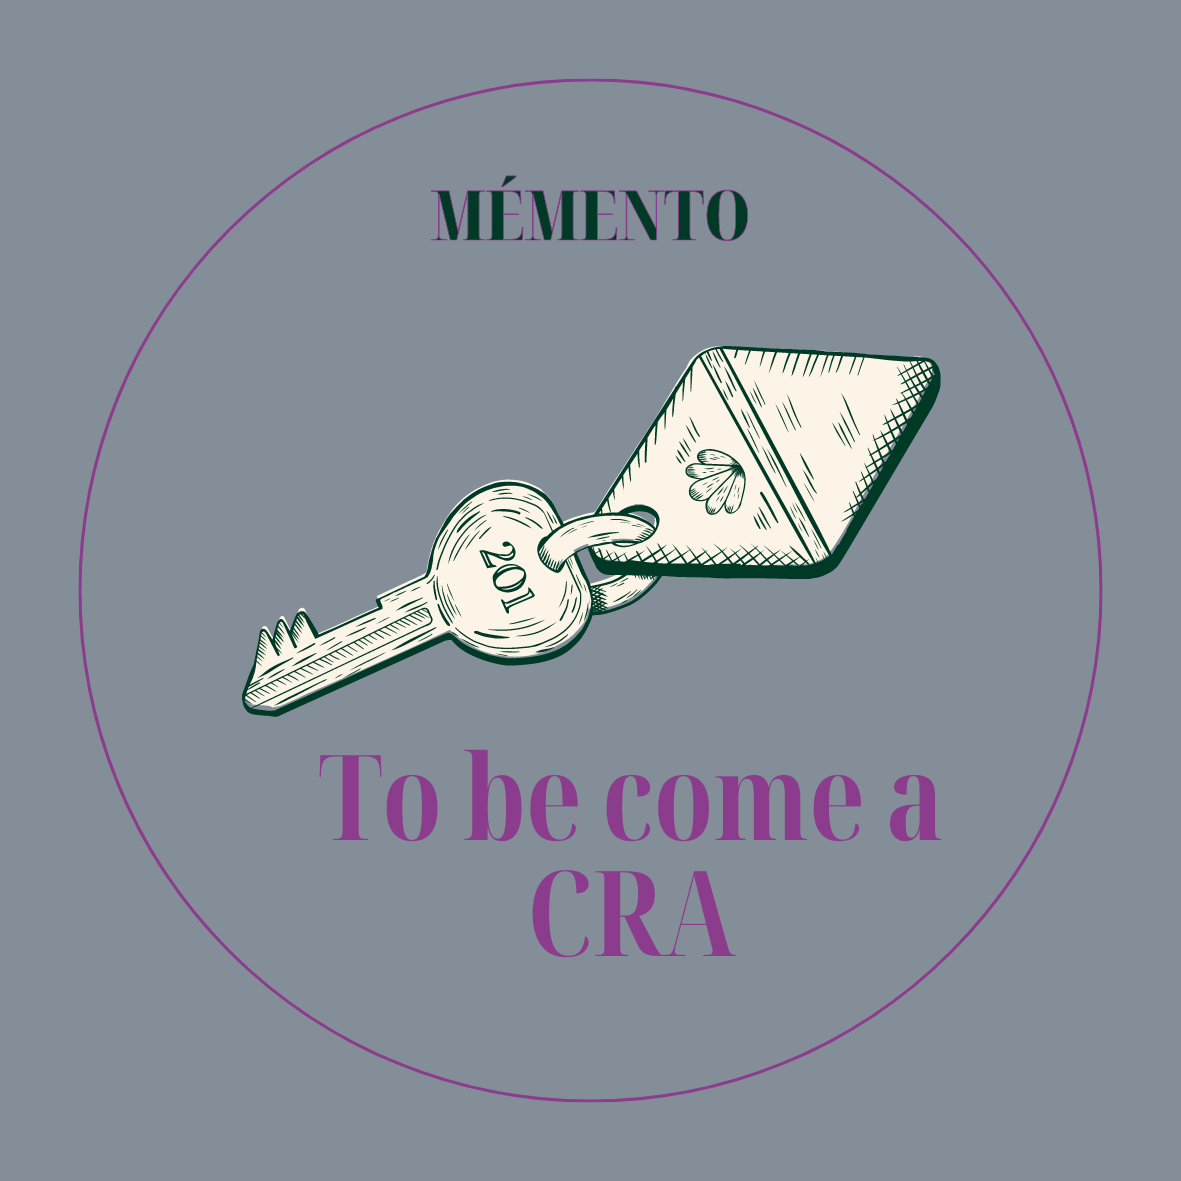 What does a CRA do exactly?